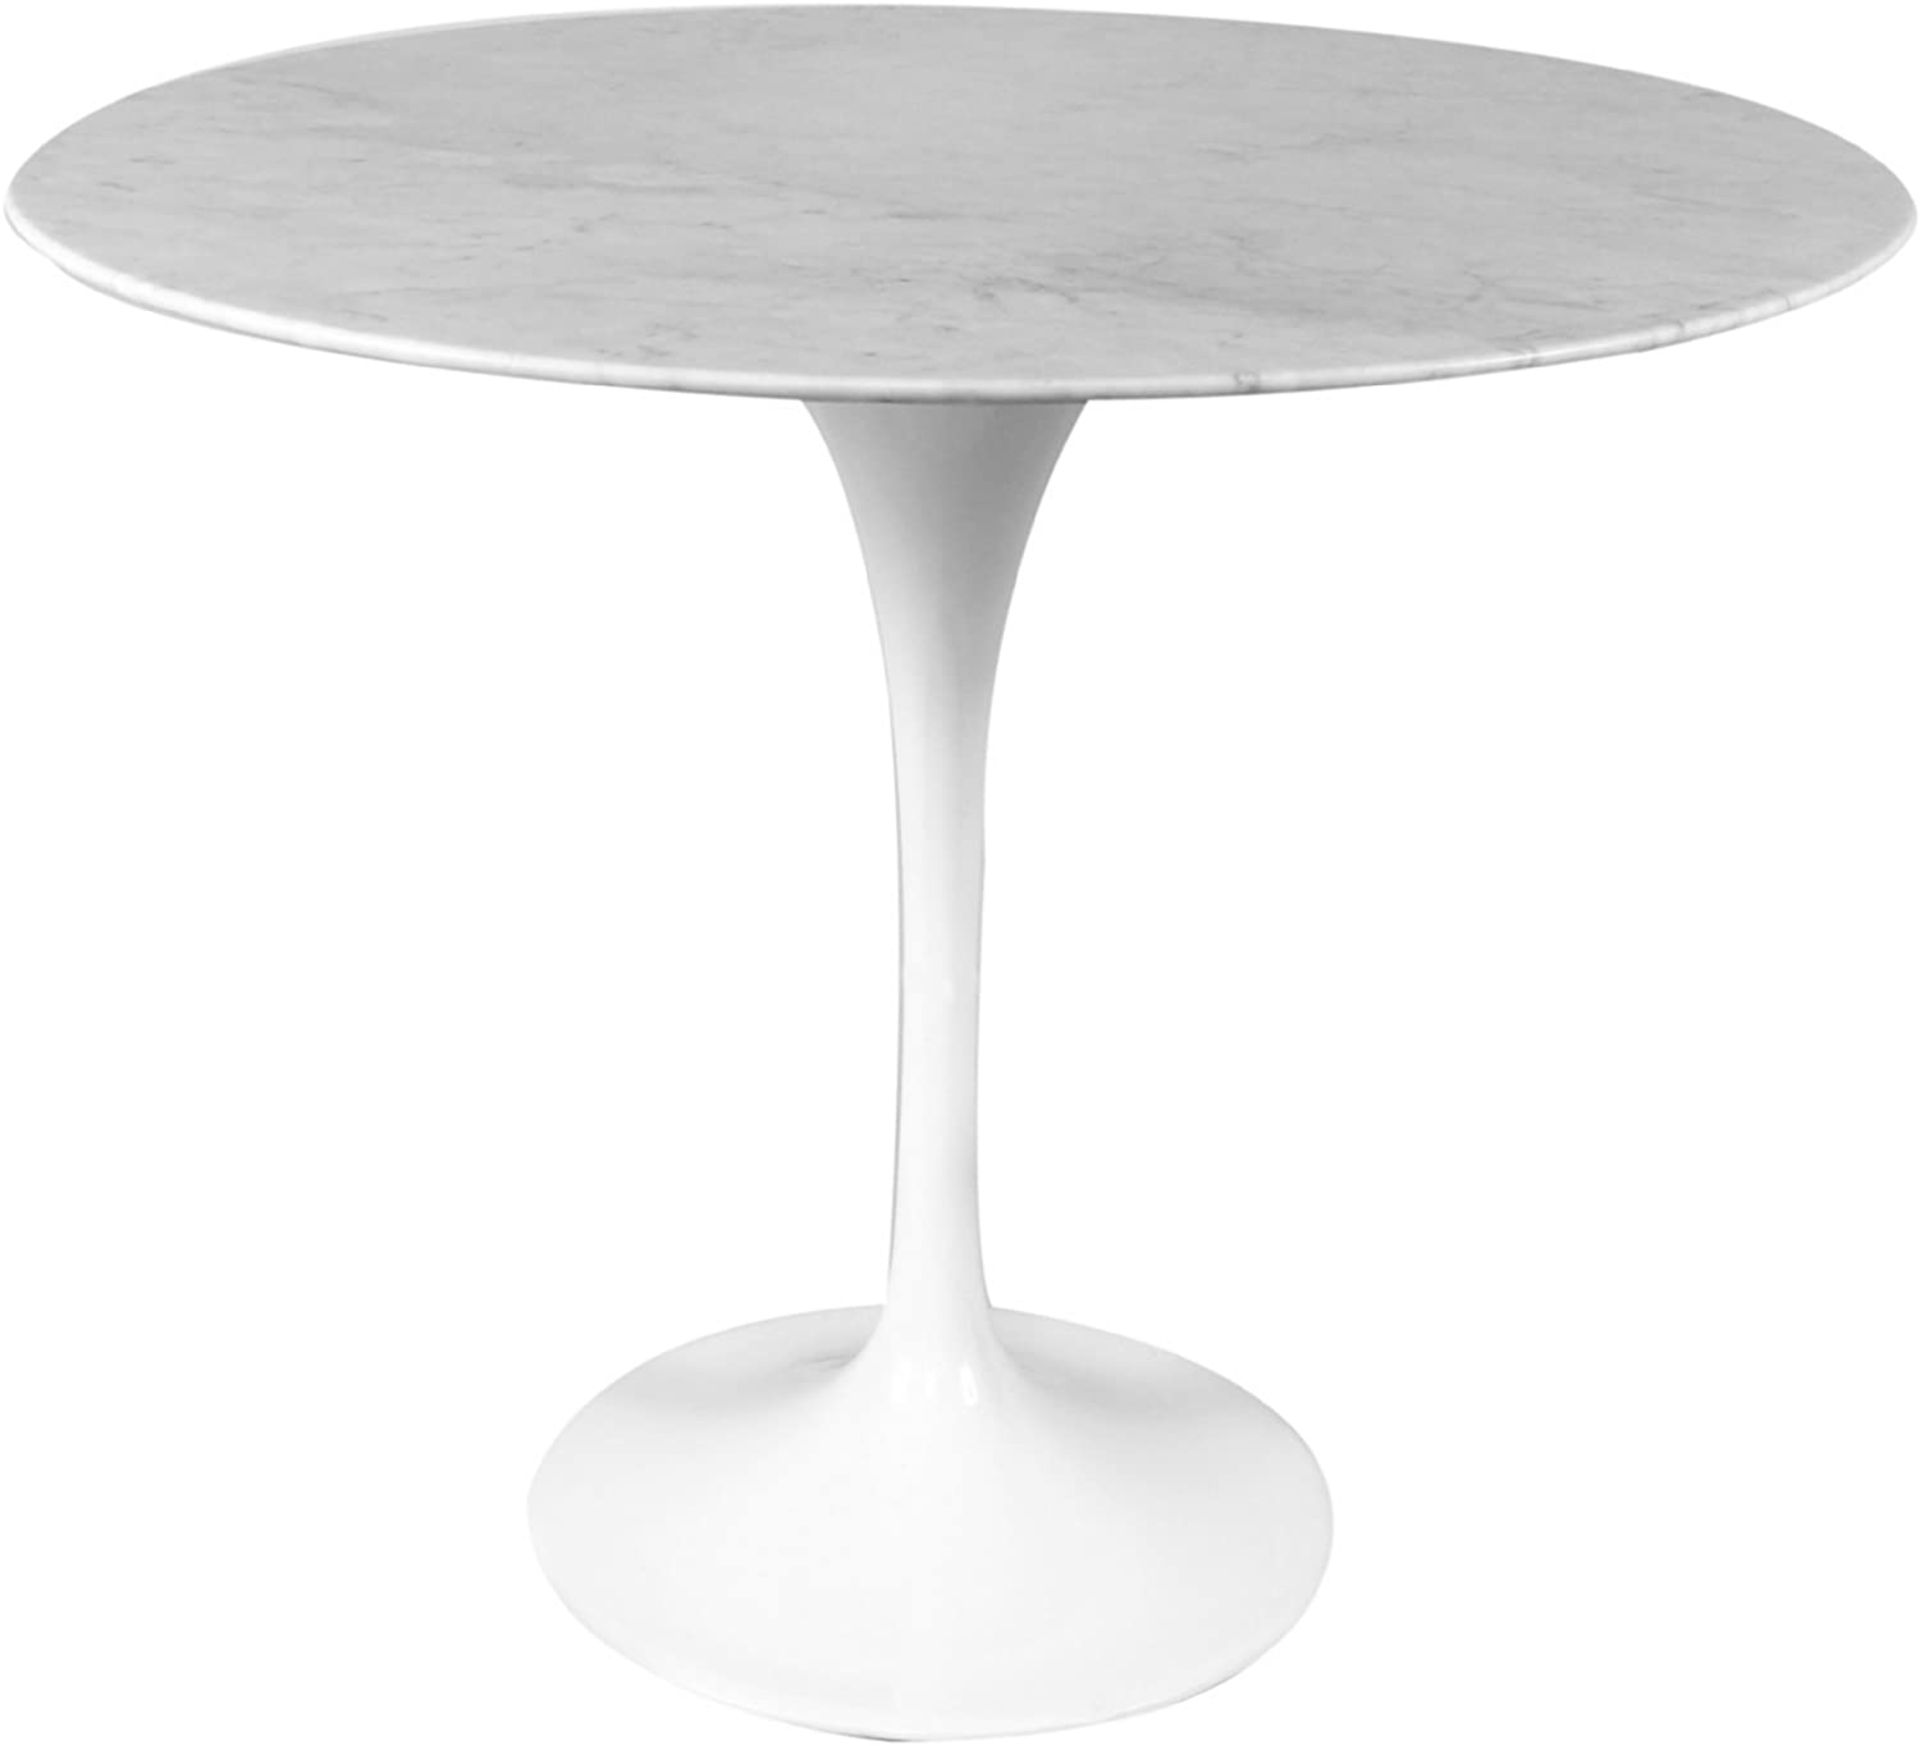 1 x Eero Saarinen Inspired Carrara Marble Tulip 50cm Occasional Table - Brand New and Boxed